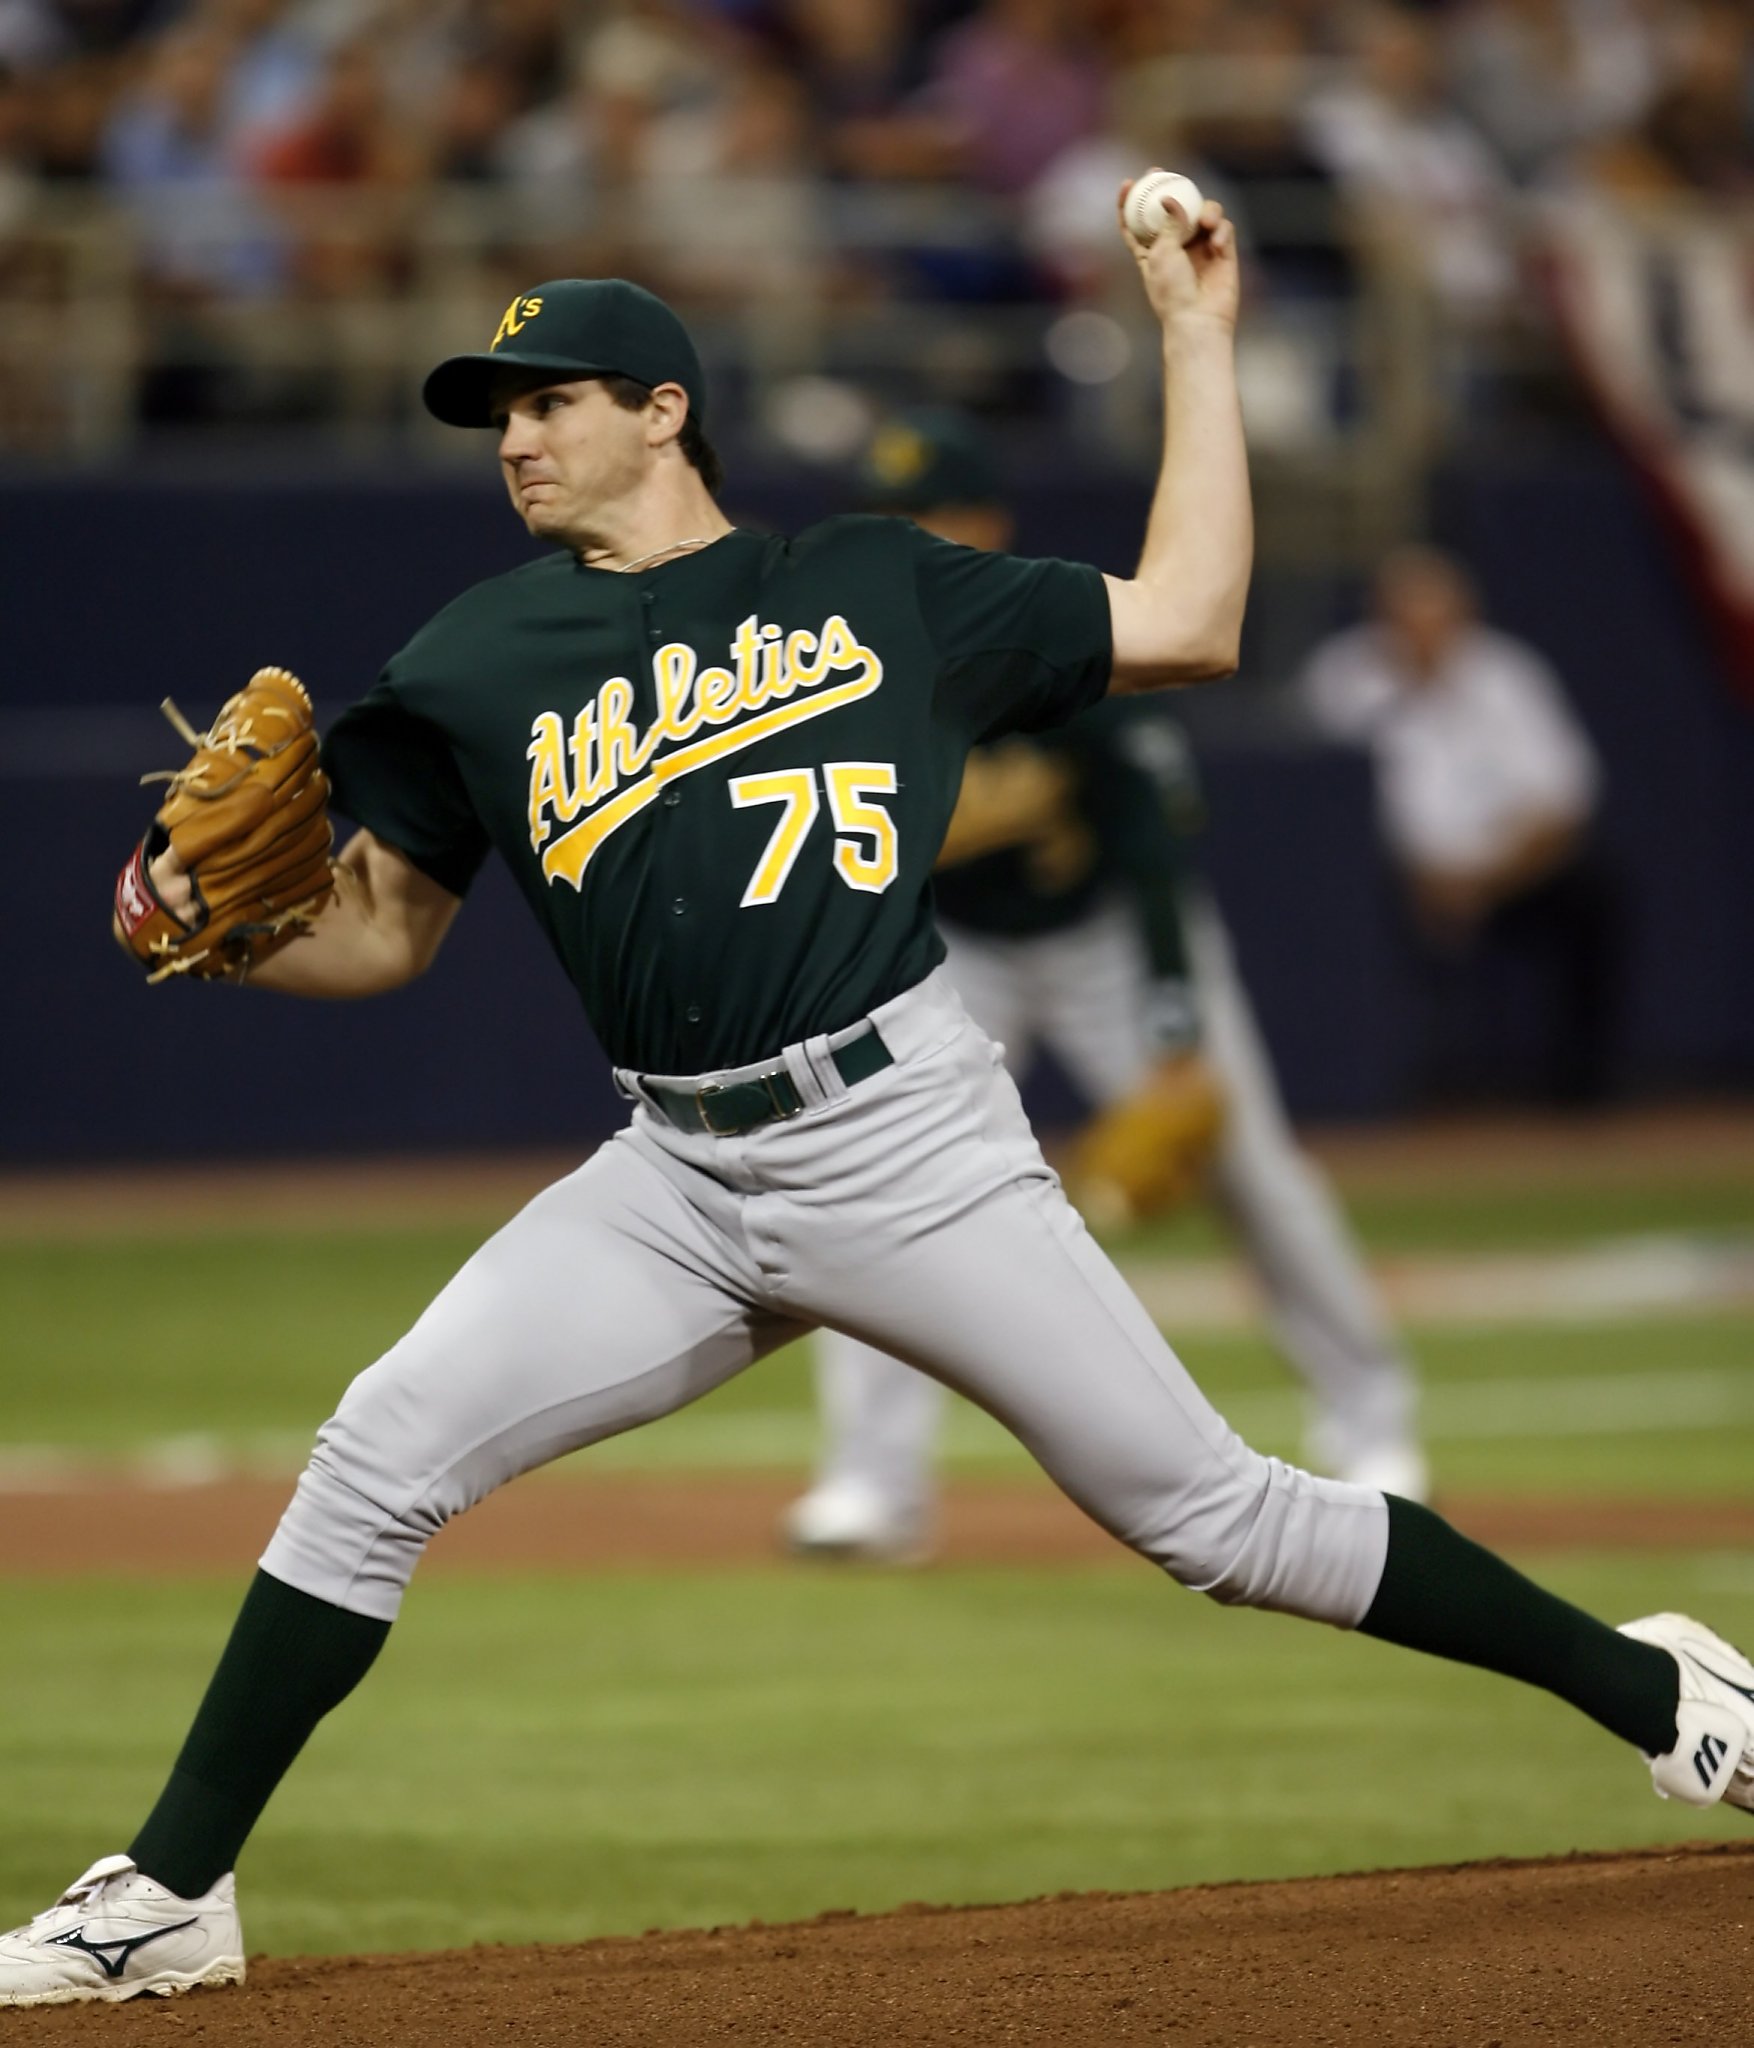 May 16, 2002: Barry Zito, A's stifle Red Sox at Fenway